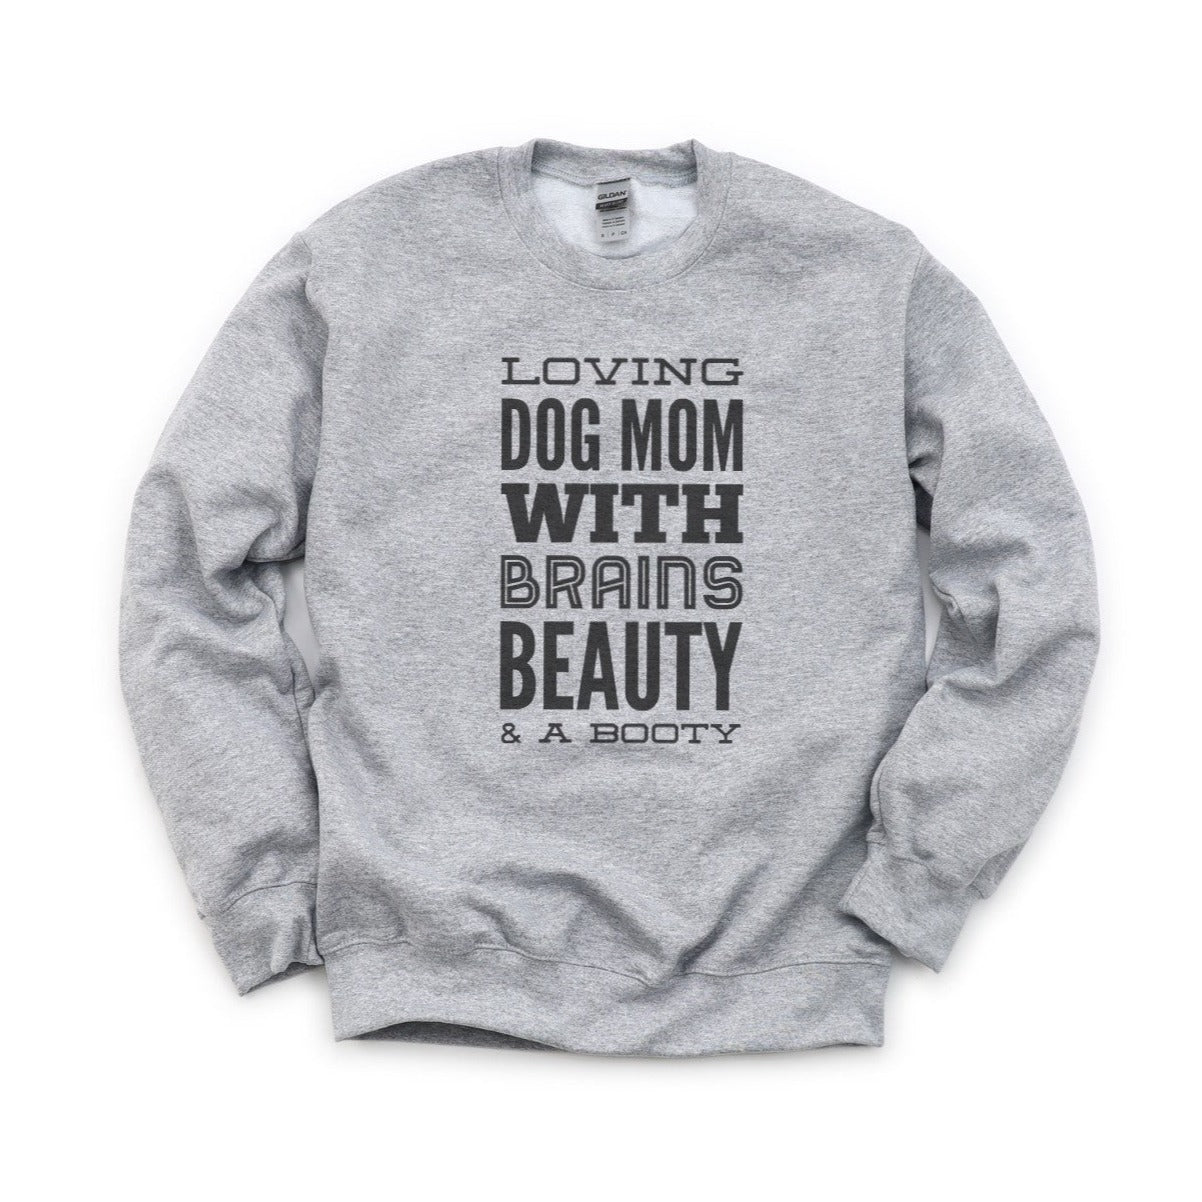 Dog Mom With Brains, Beauty, And A Booty Sweatshirt